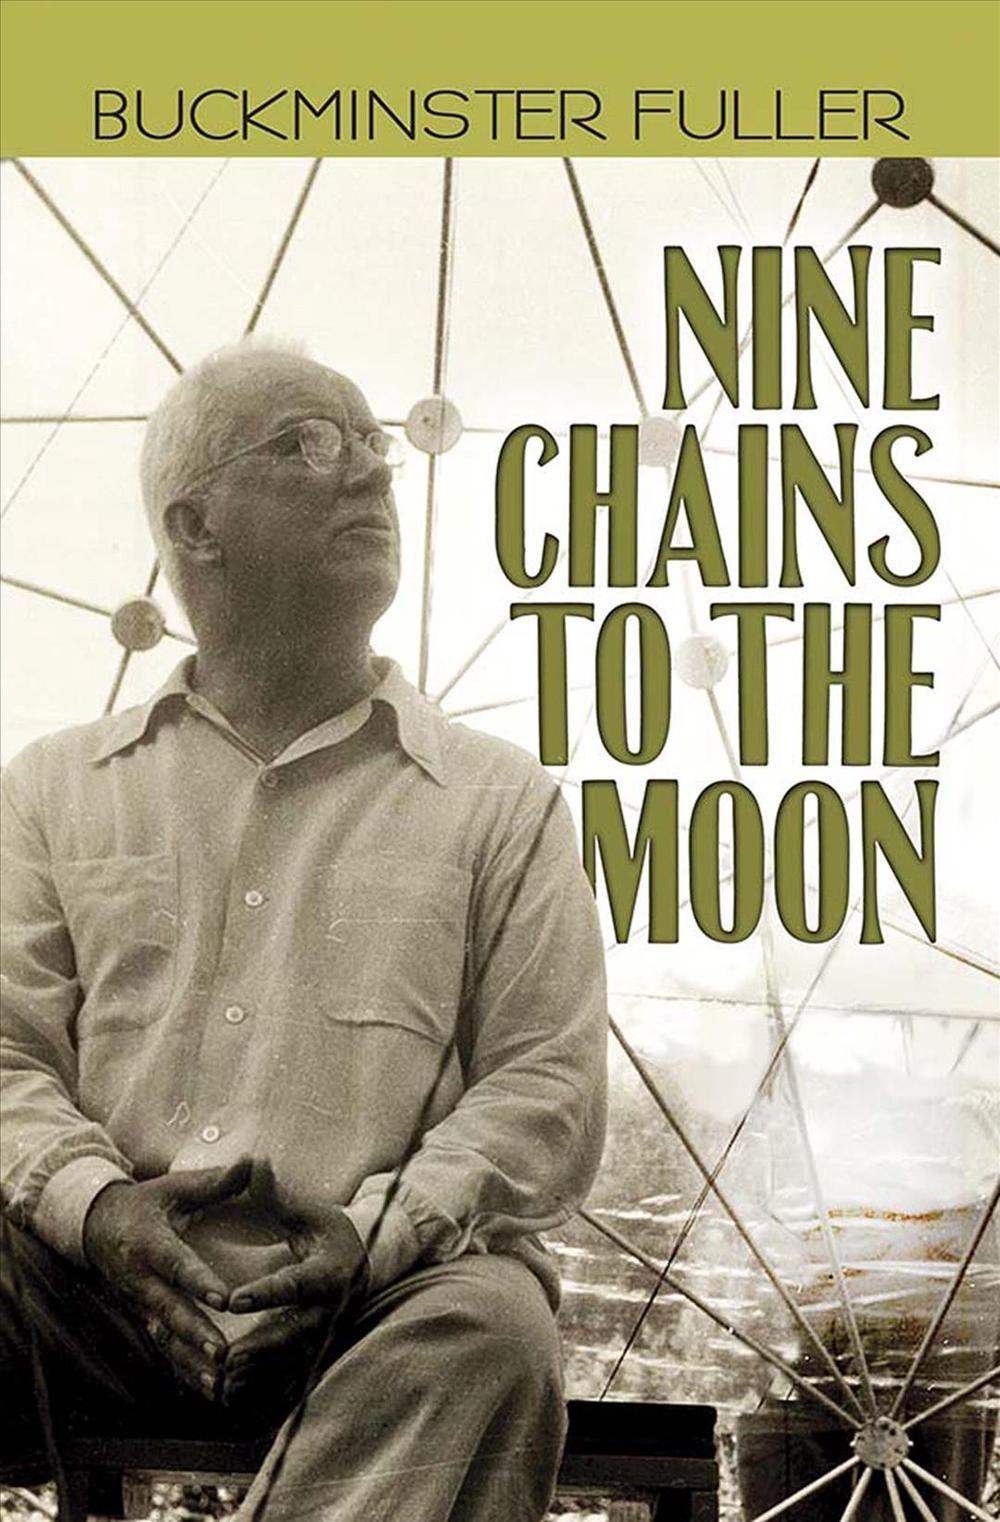 FULLER: NINE CHAINS TO THE MOON